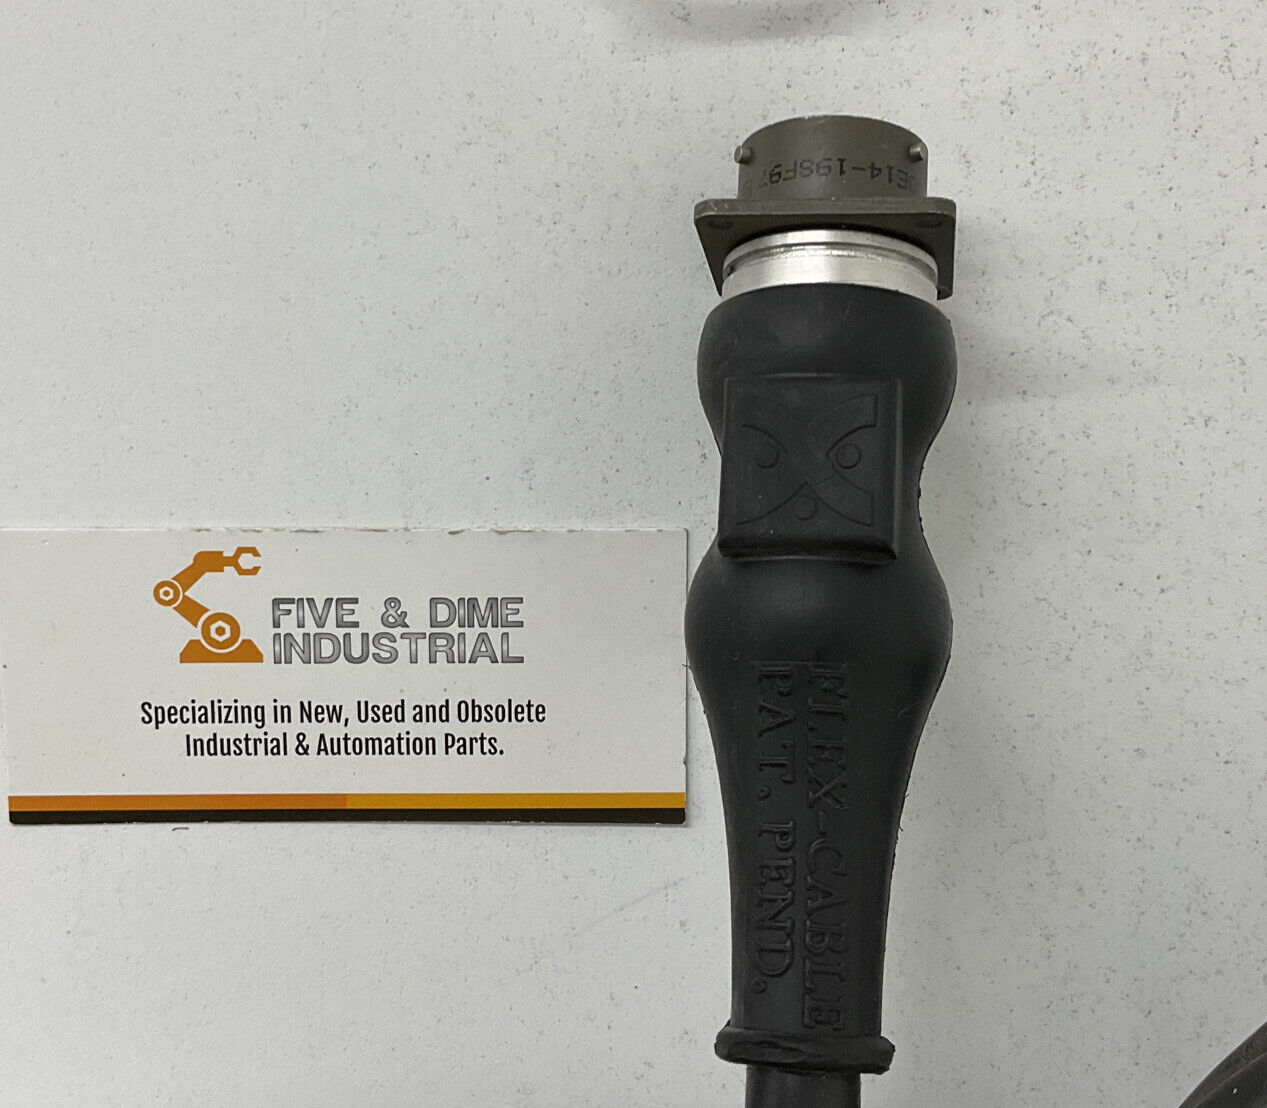 Flexcable FC-UXFDFN-S-9792-E039 Motor Feedback Cable (CBL135)